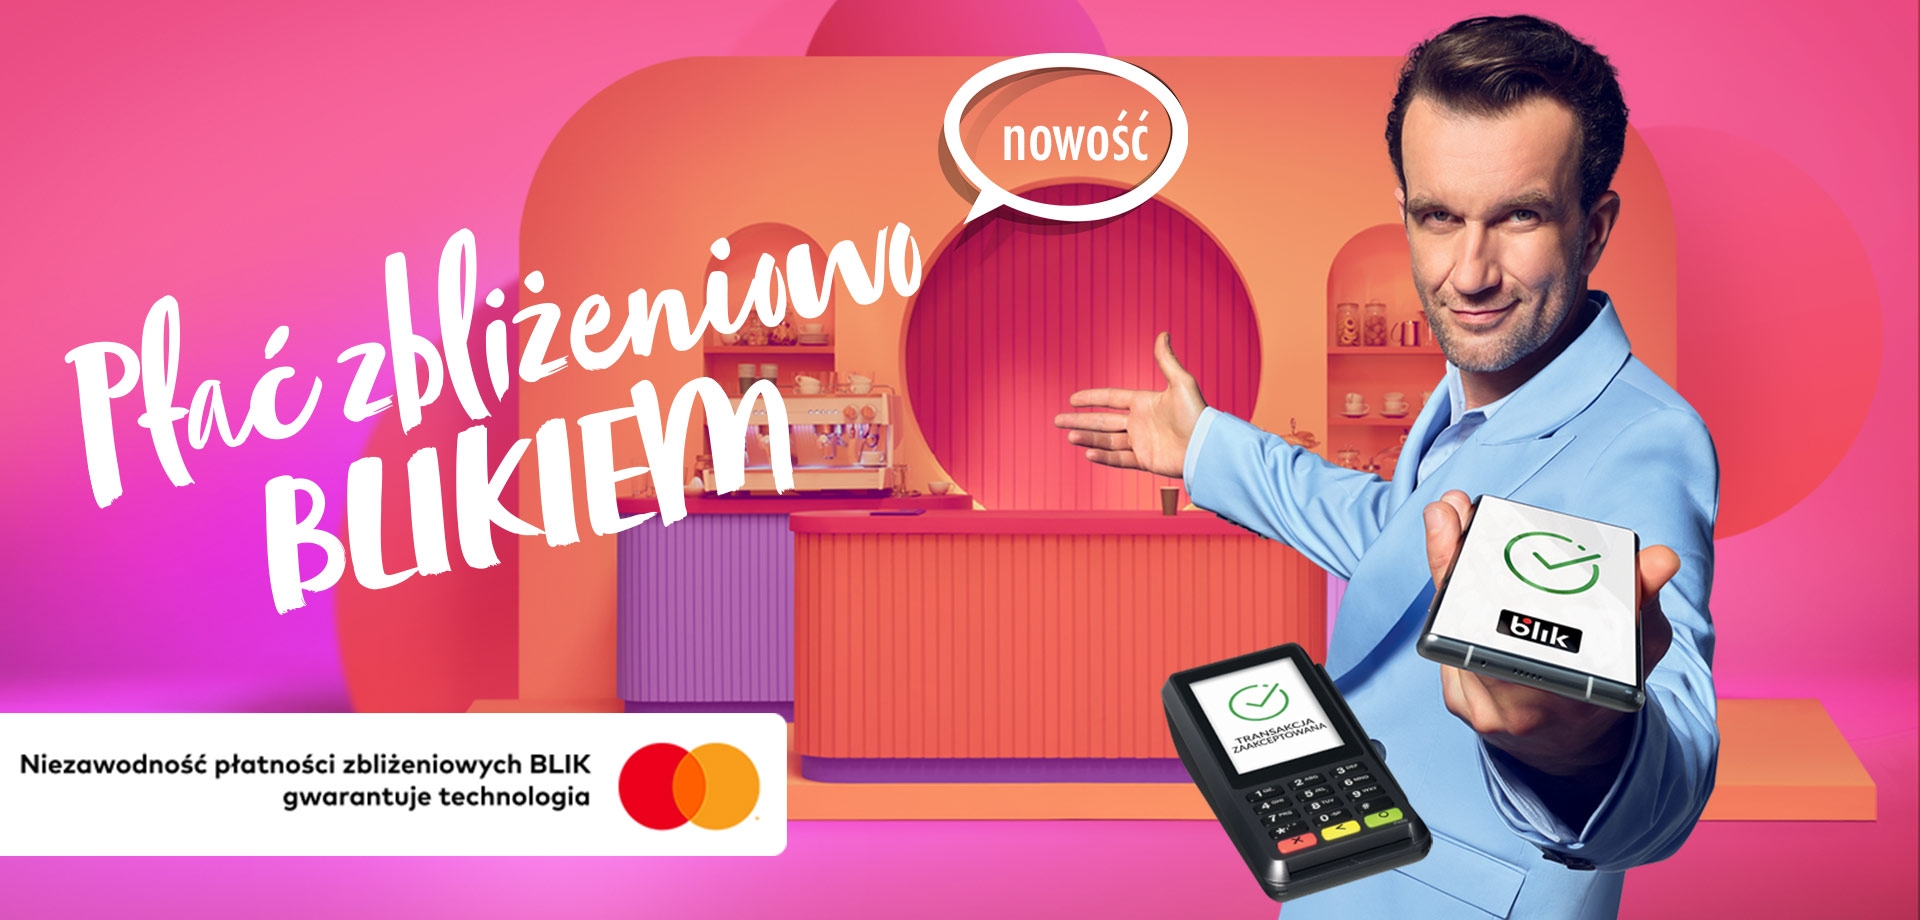 Change Serviceplan launches a new contactless payment campaign for Blik.